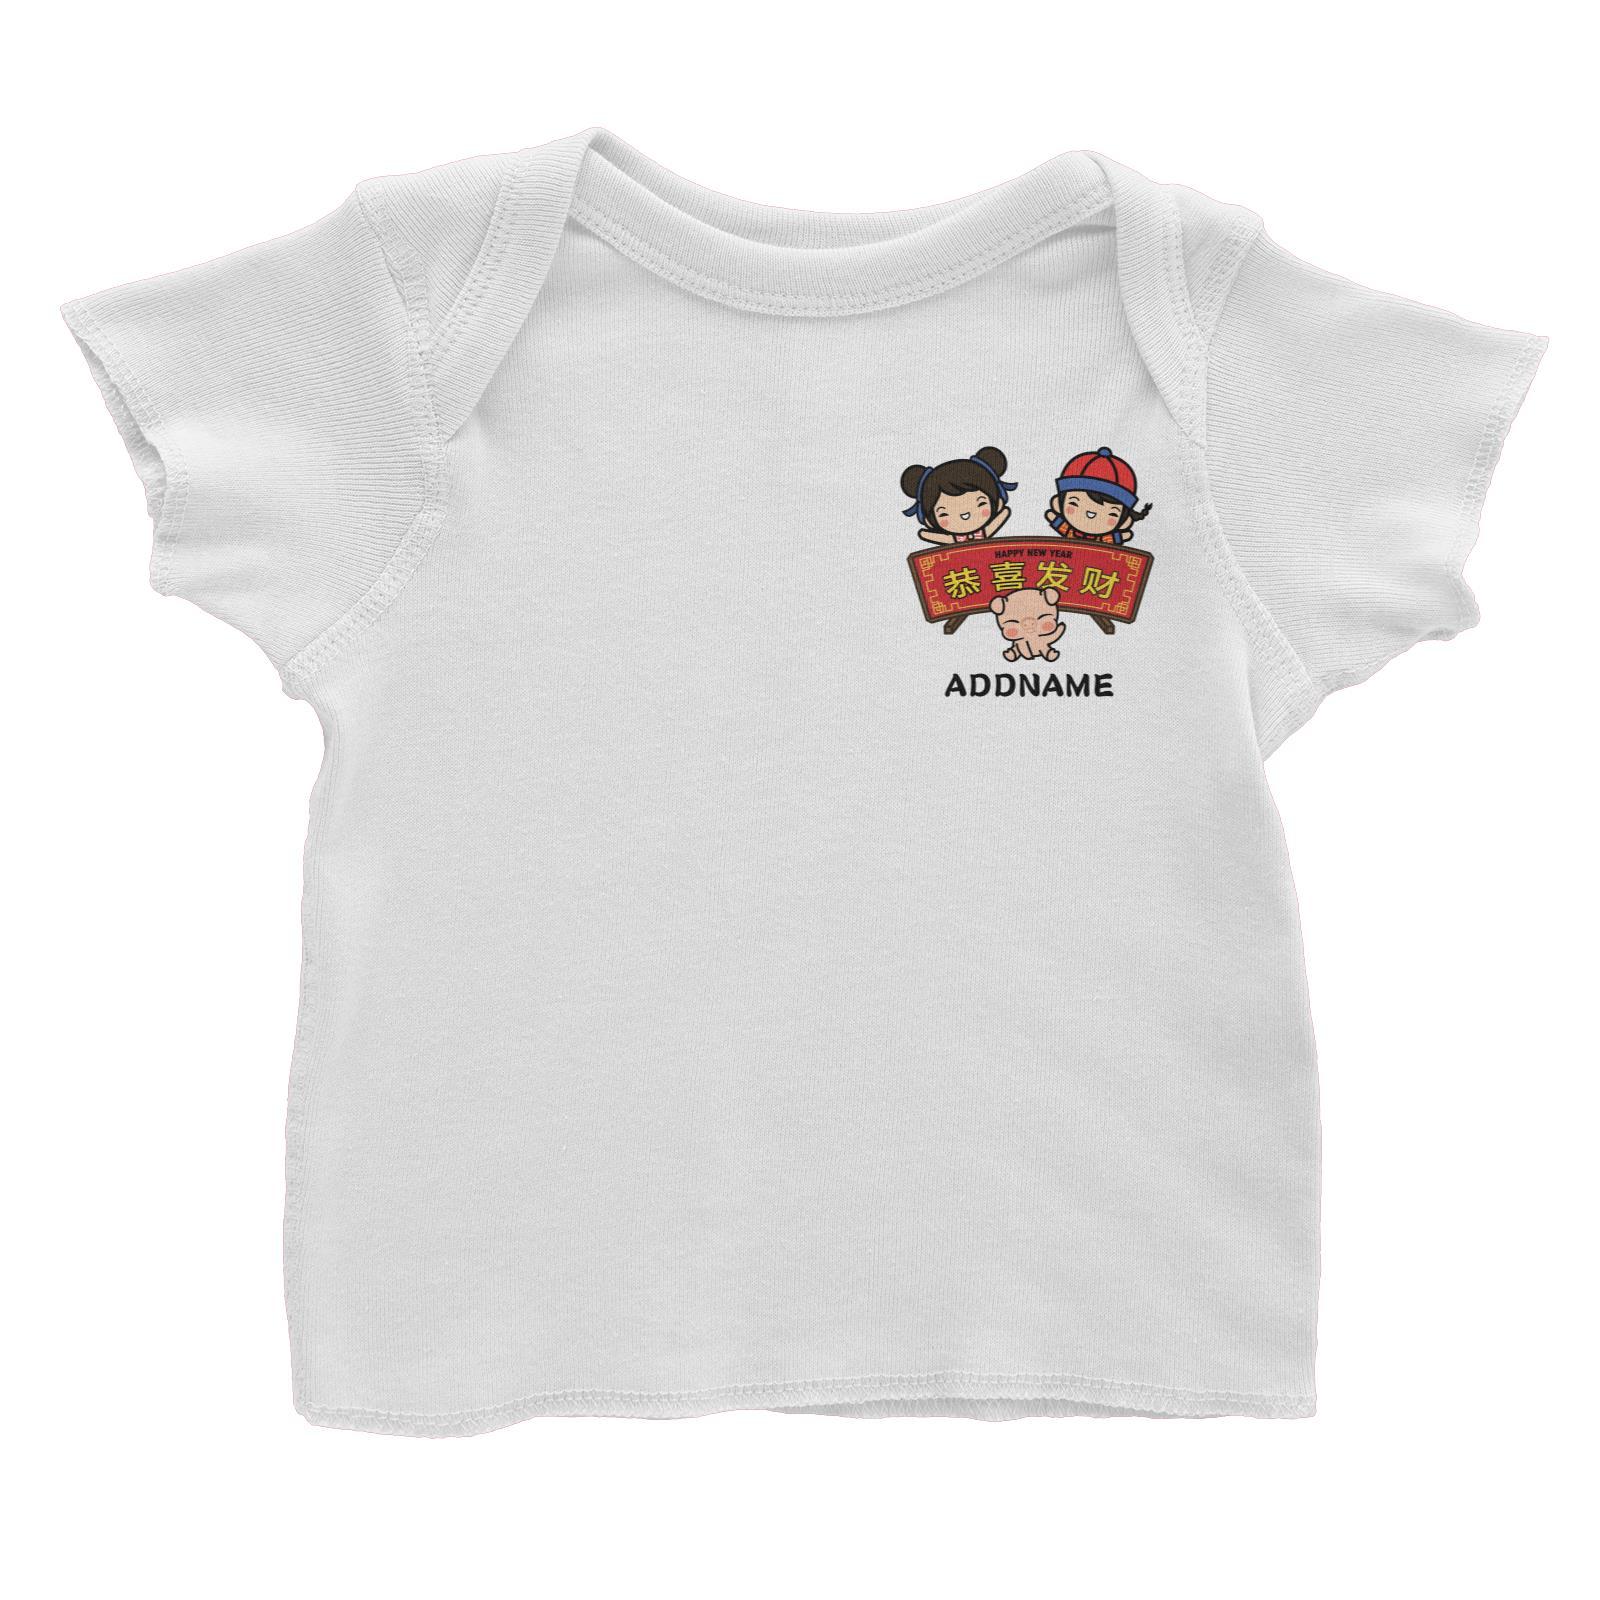 Prosperity Pig Boy, Girl And Baby Pig with Signage Pocket Design Baby T-Shirt